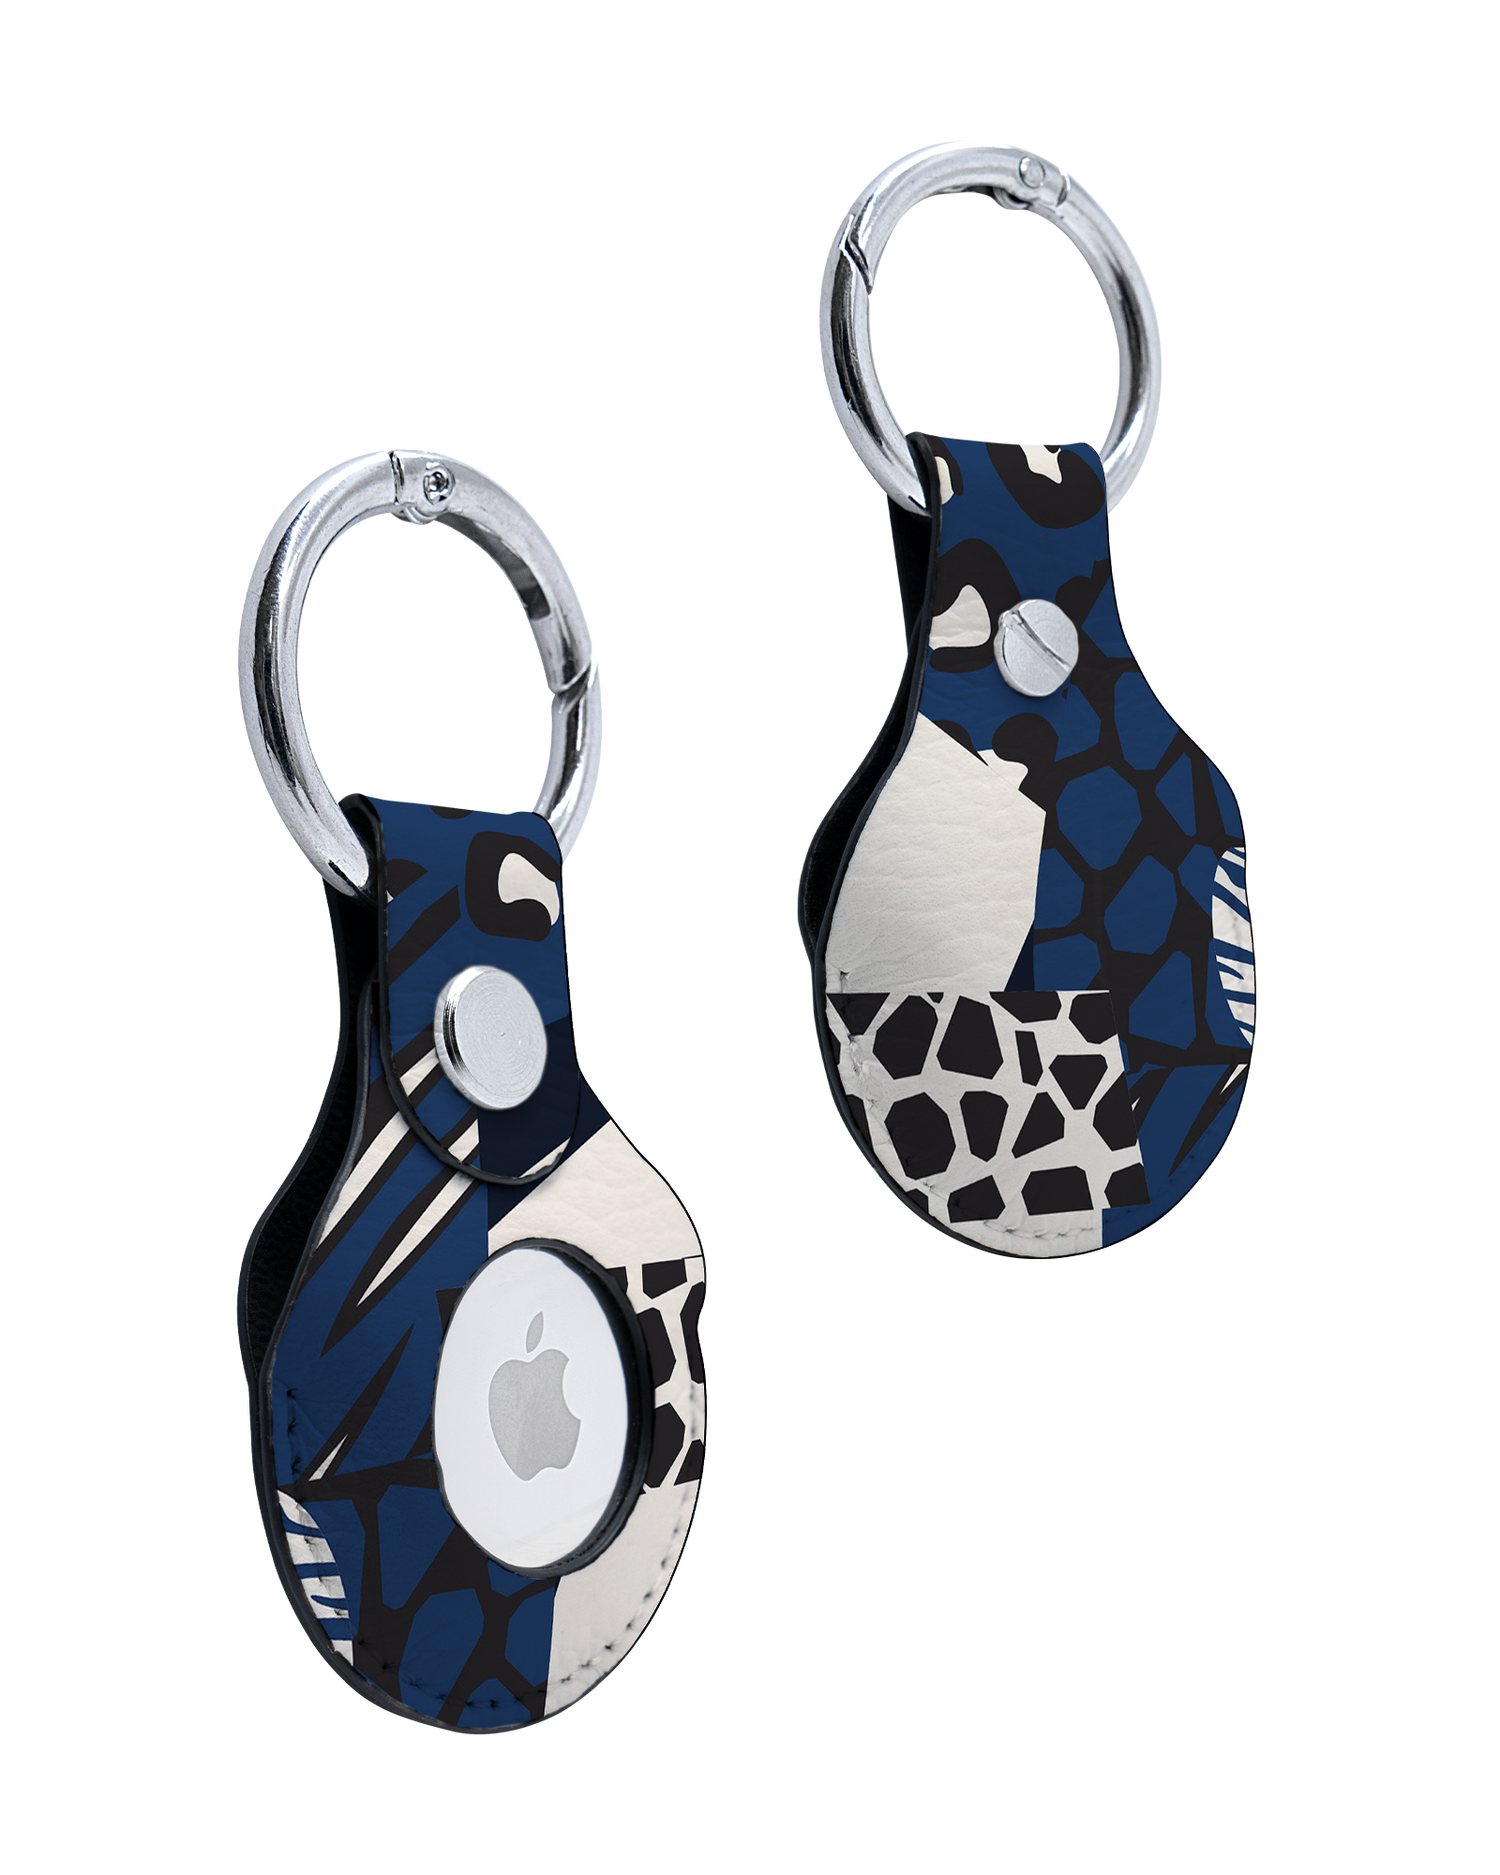 AirTag Holder with Animal Print Patchwork Design: Front and Back